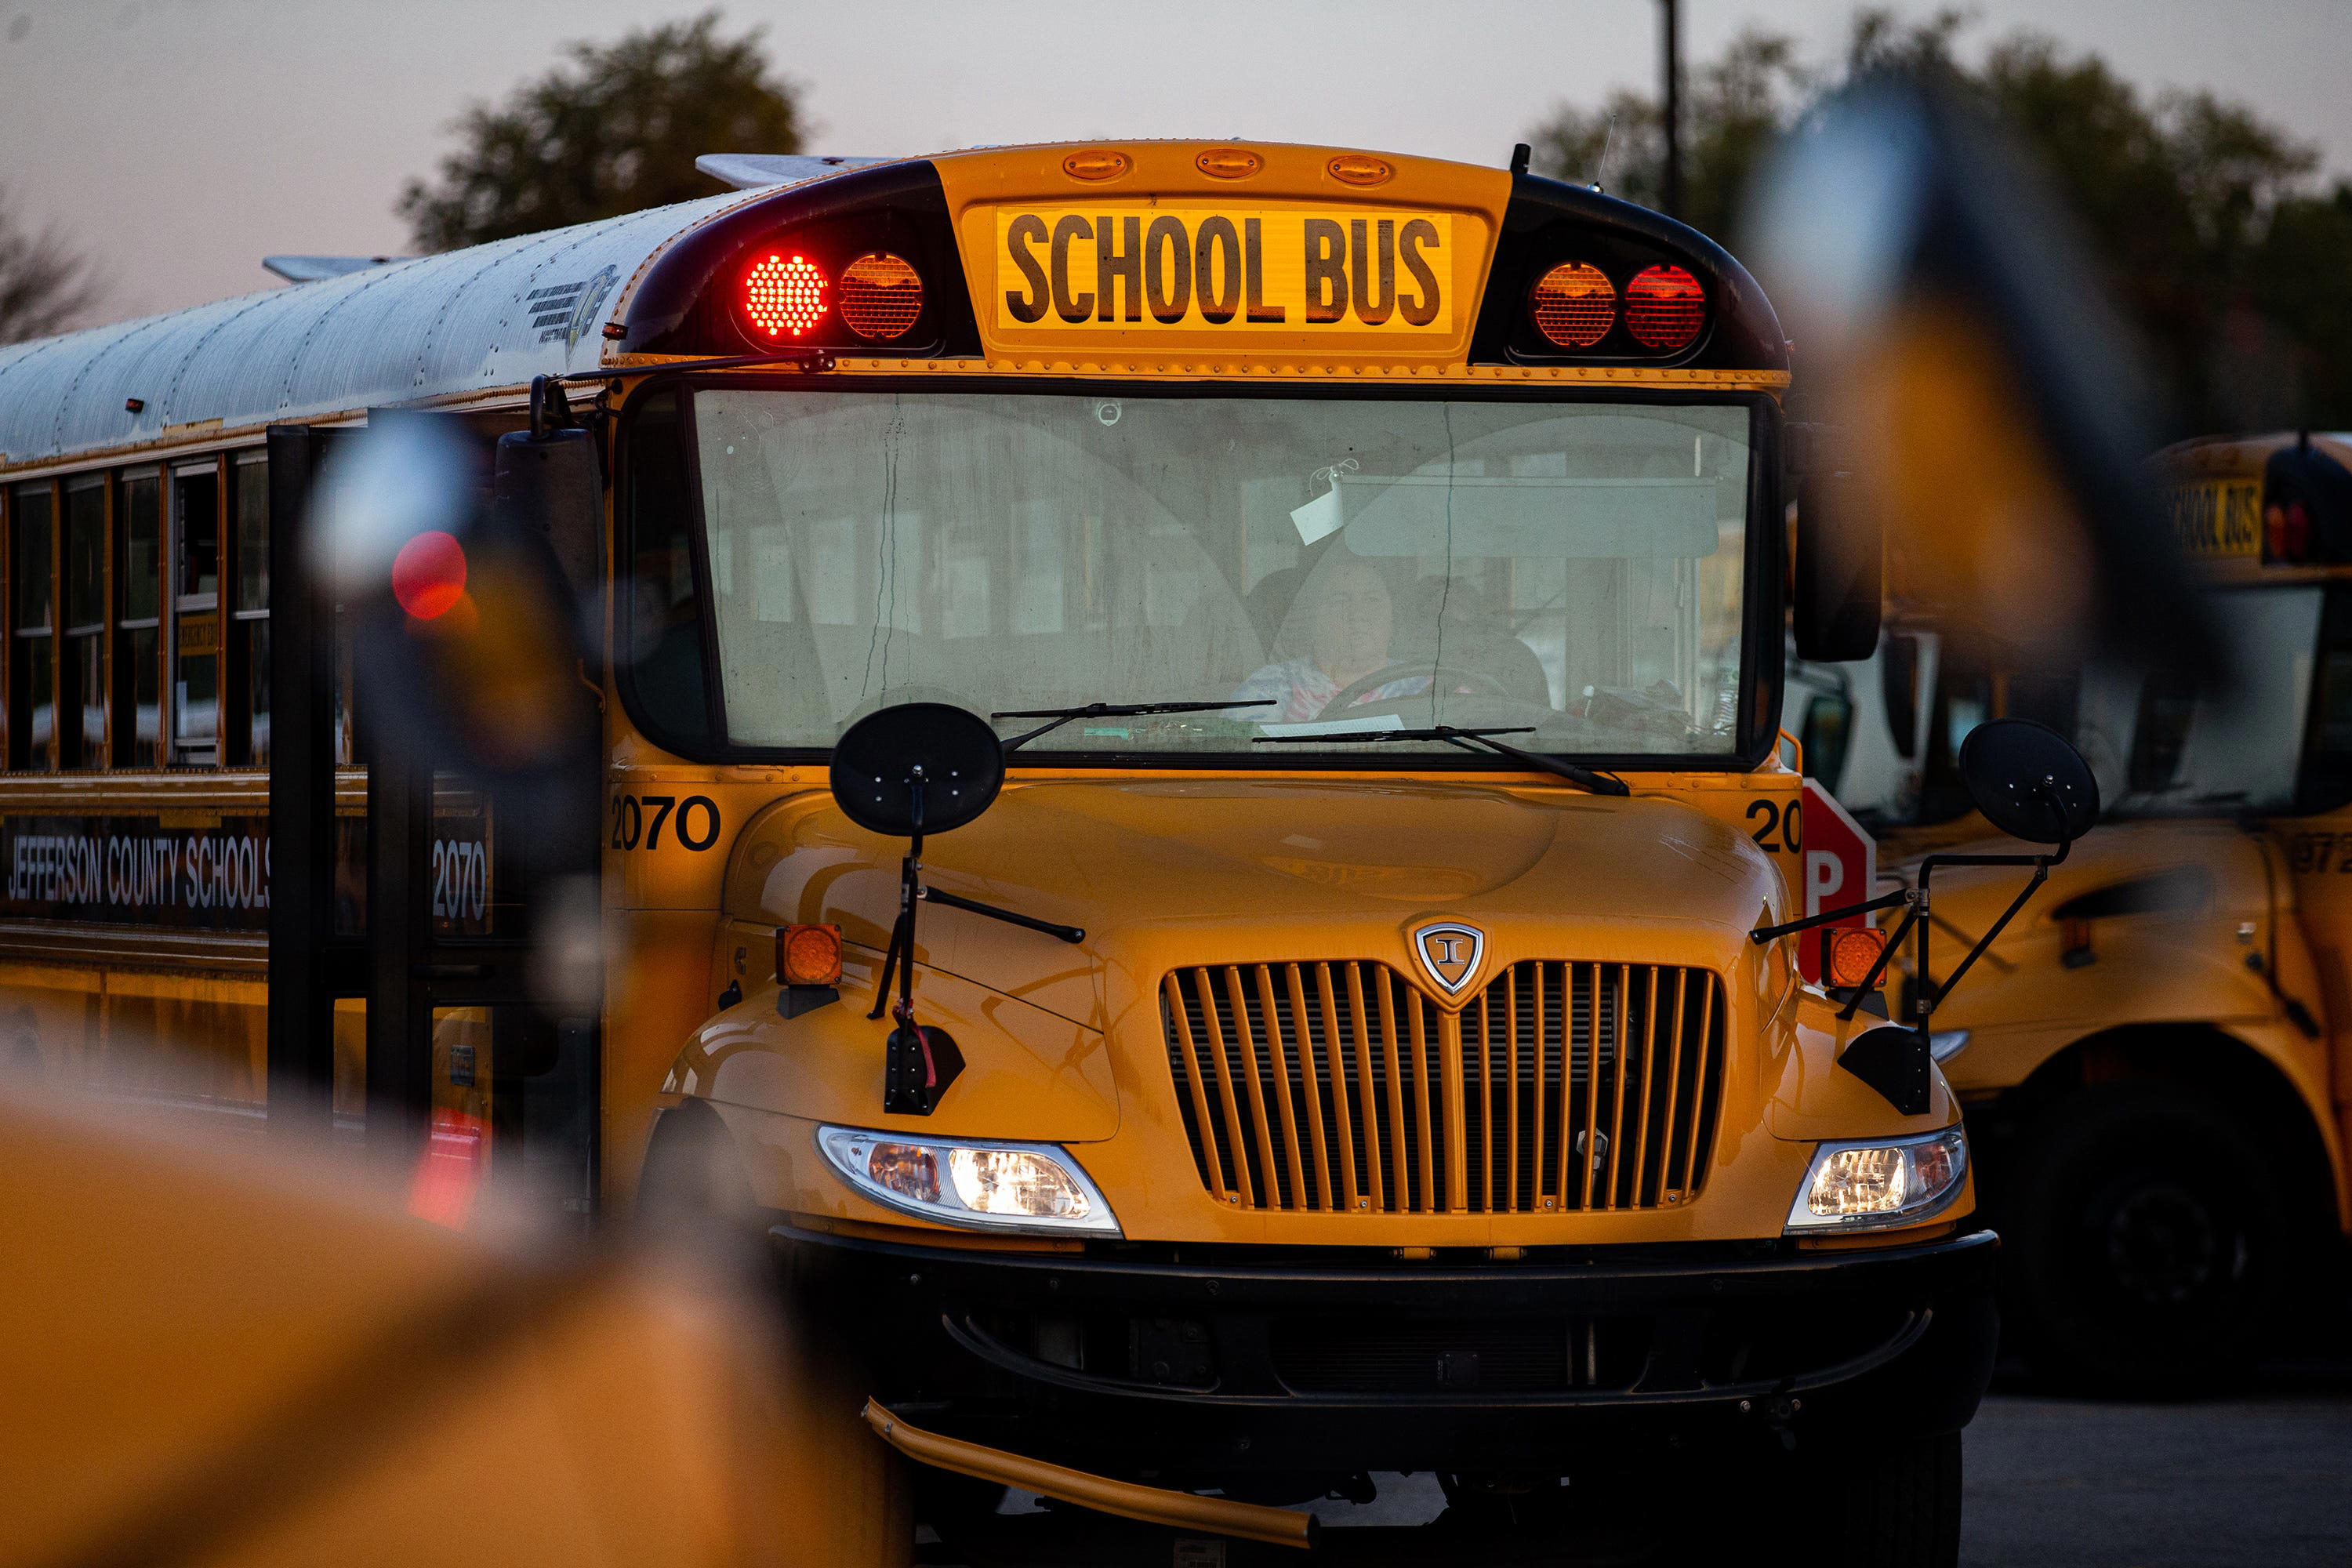 Second grader taken to hospital after JCPS bus strike in stable condition